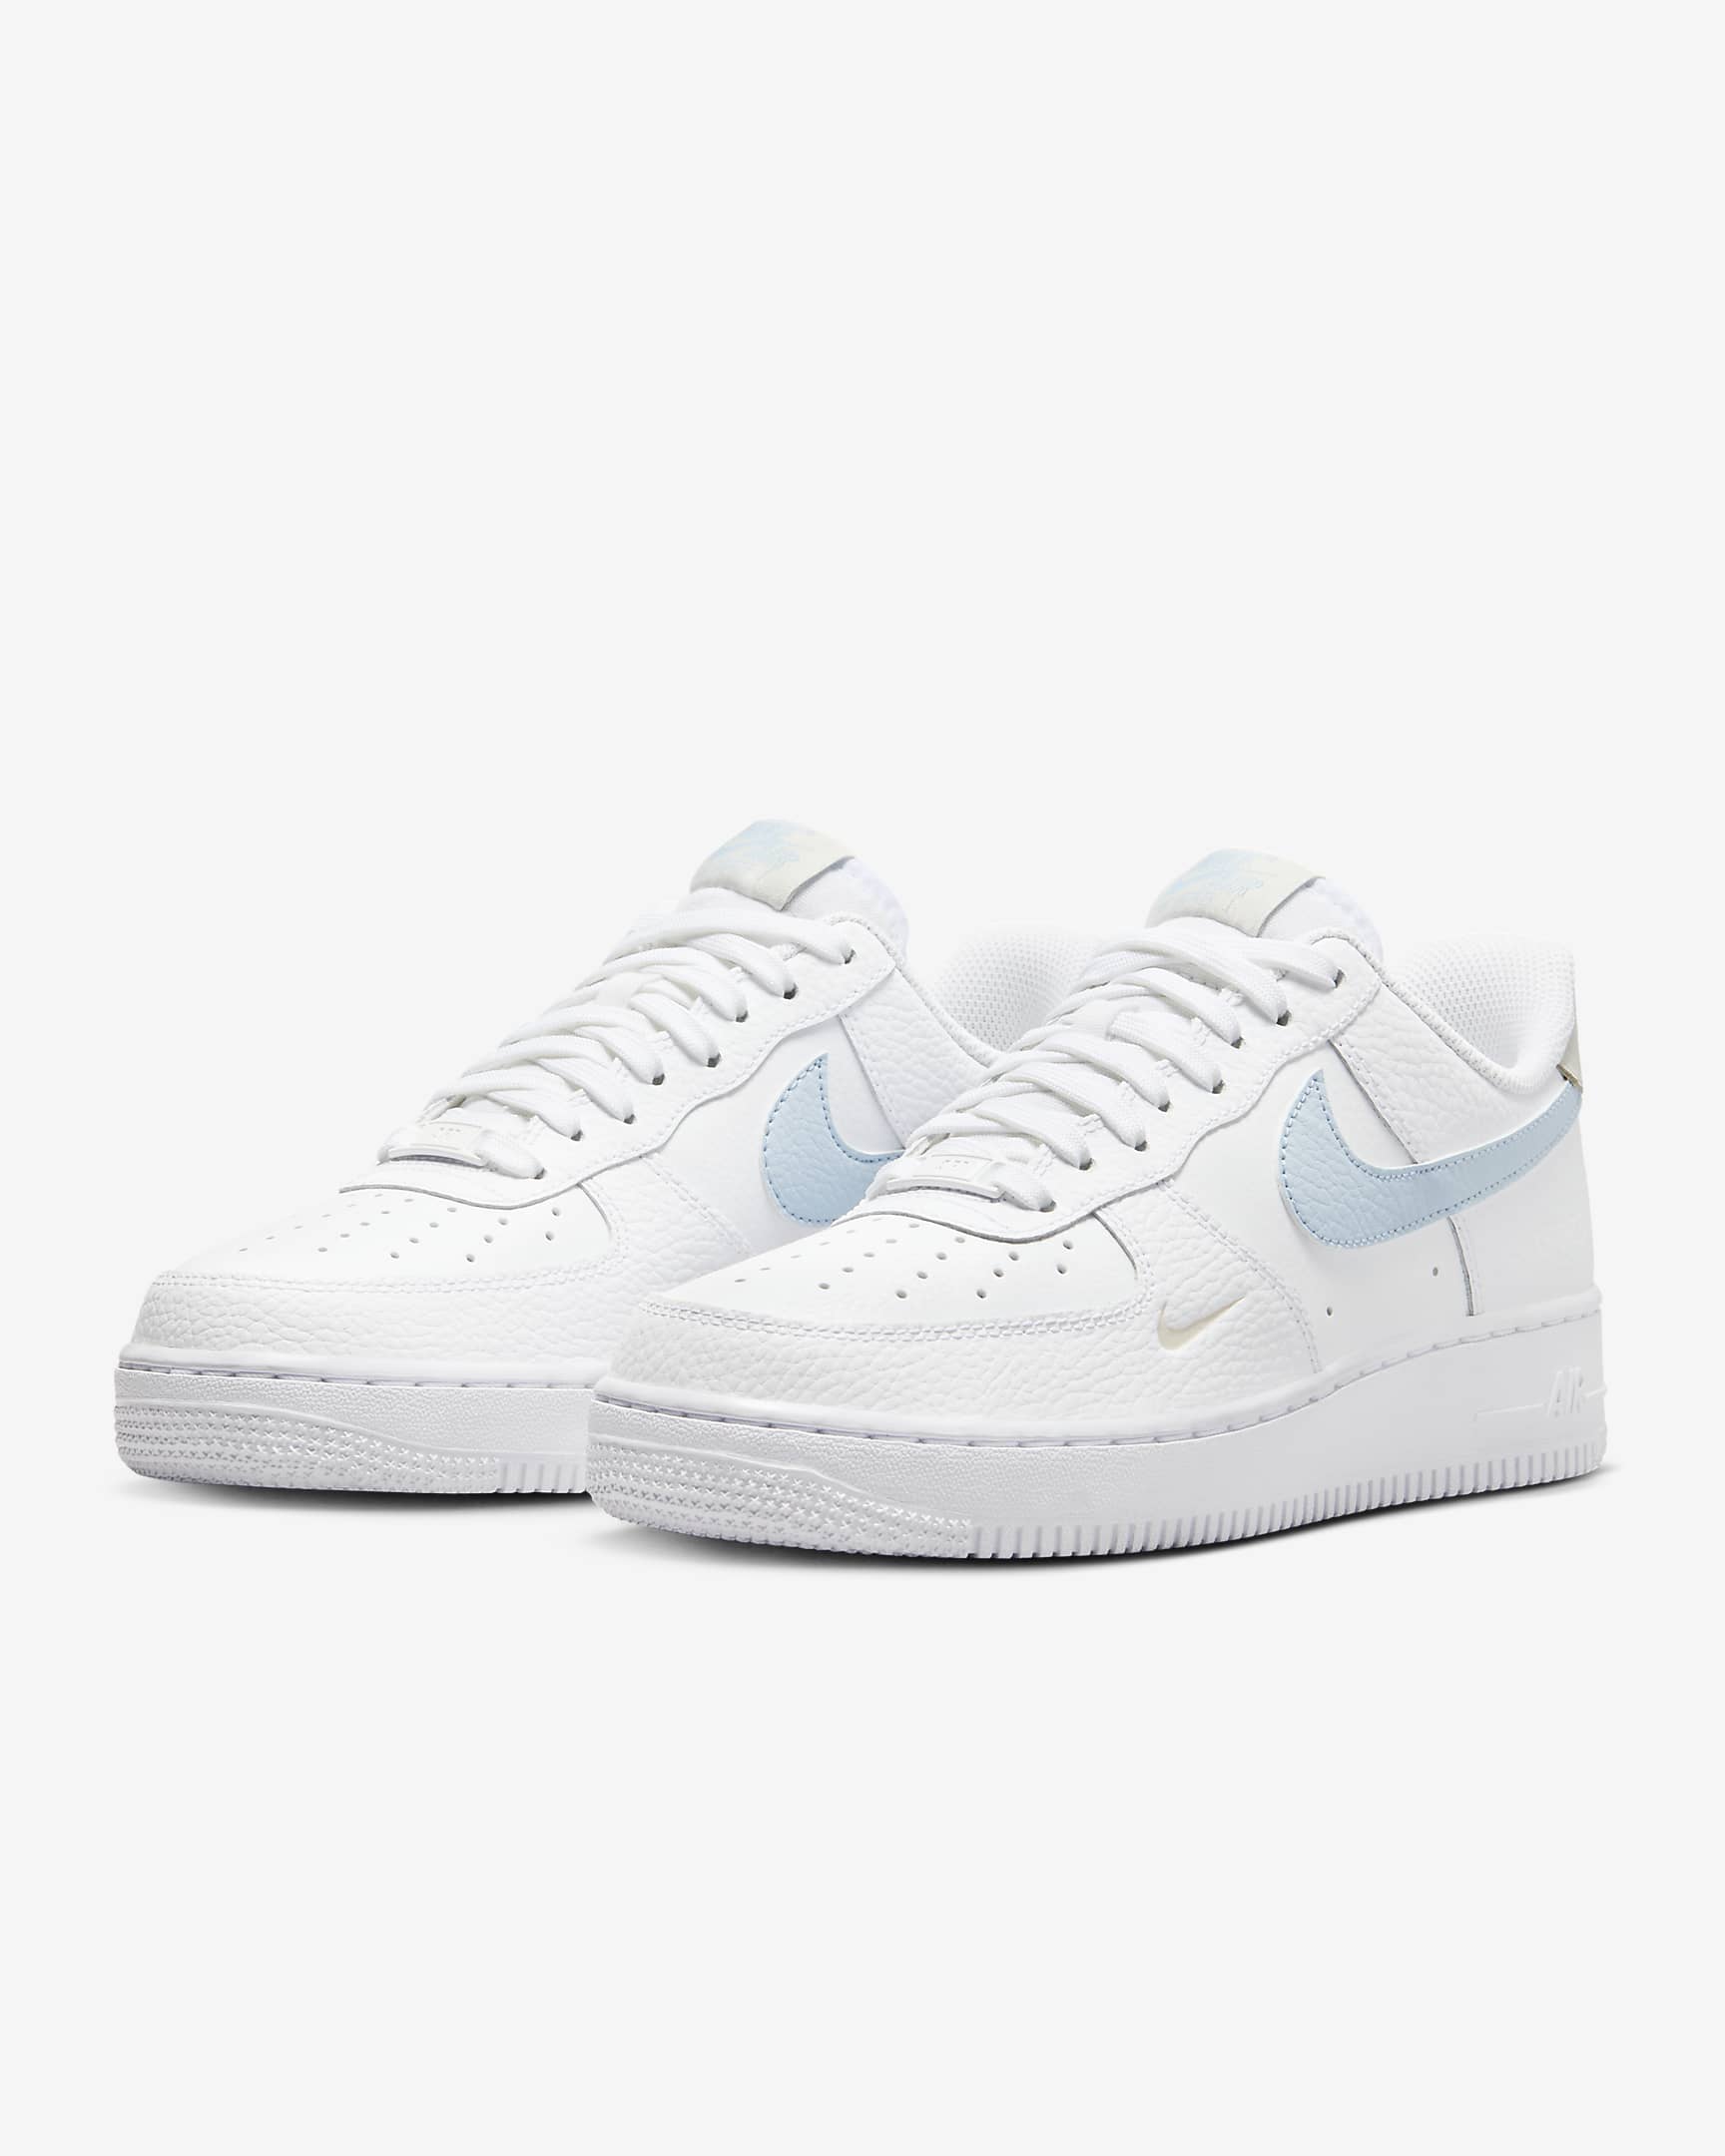 Nike Air Force 1 '07 Women's Shoes. Nike AT